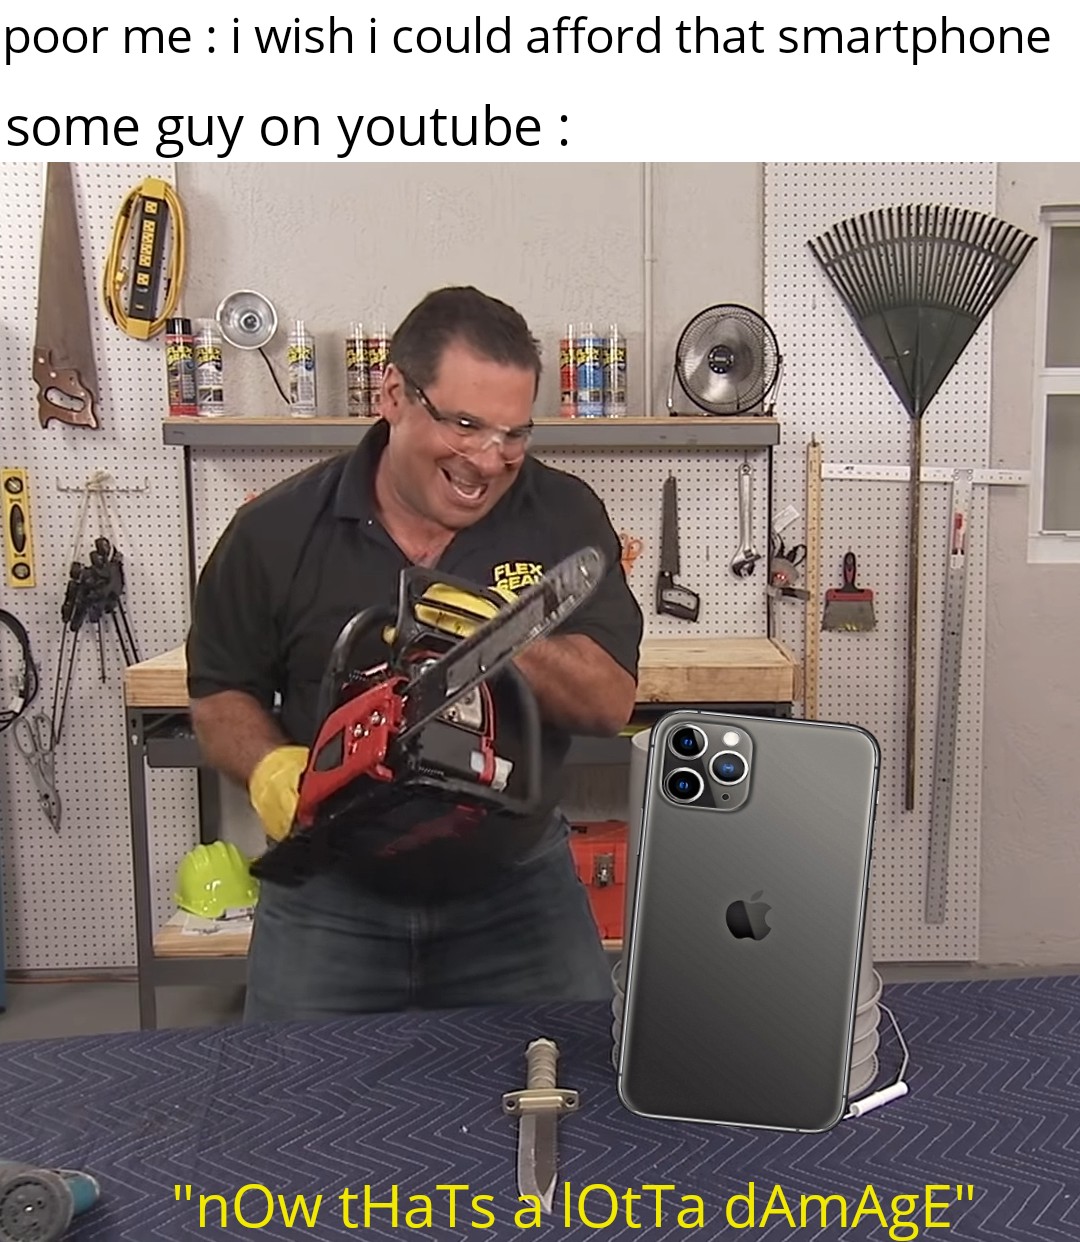 dr bright scp 682 memes - poor me i wish i could afford that smartphone some guy on youtube Studi Flex Sean "nOw tHats a lotTa dAmAgE" 12